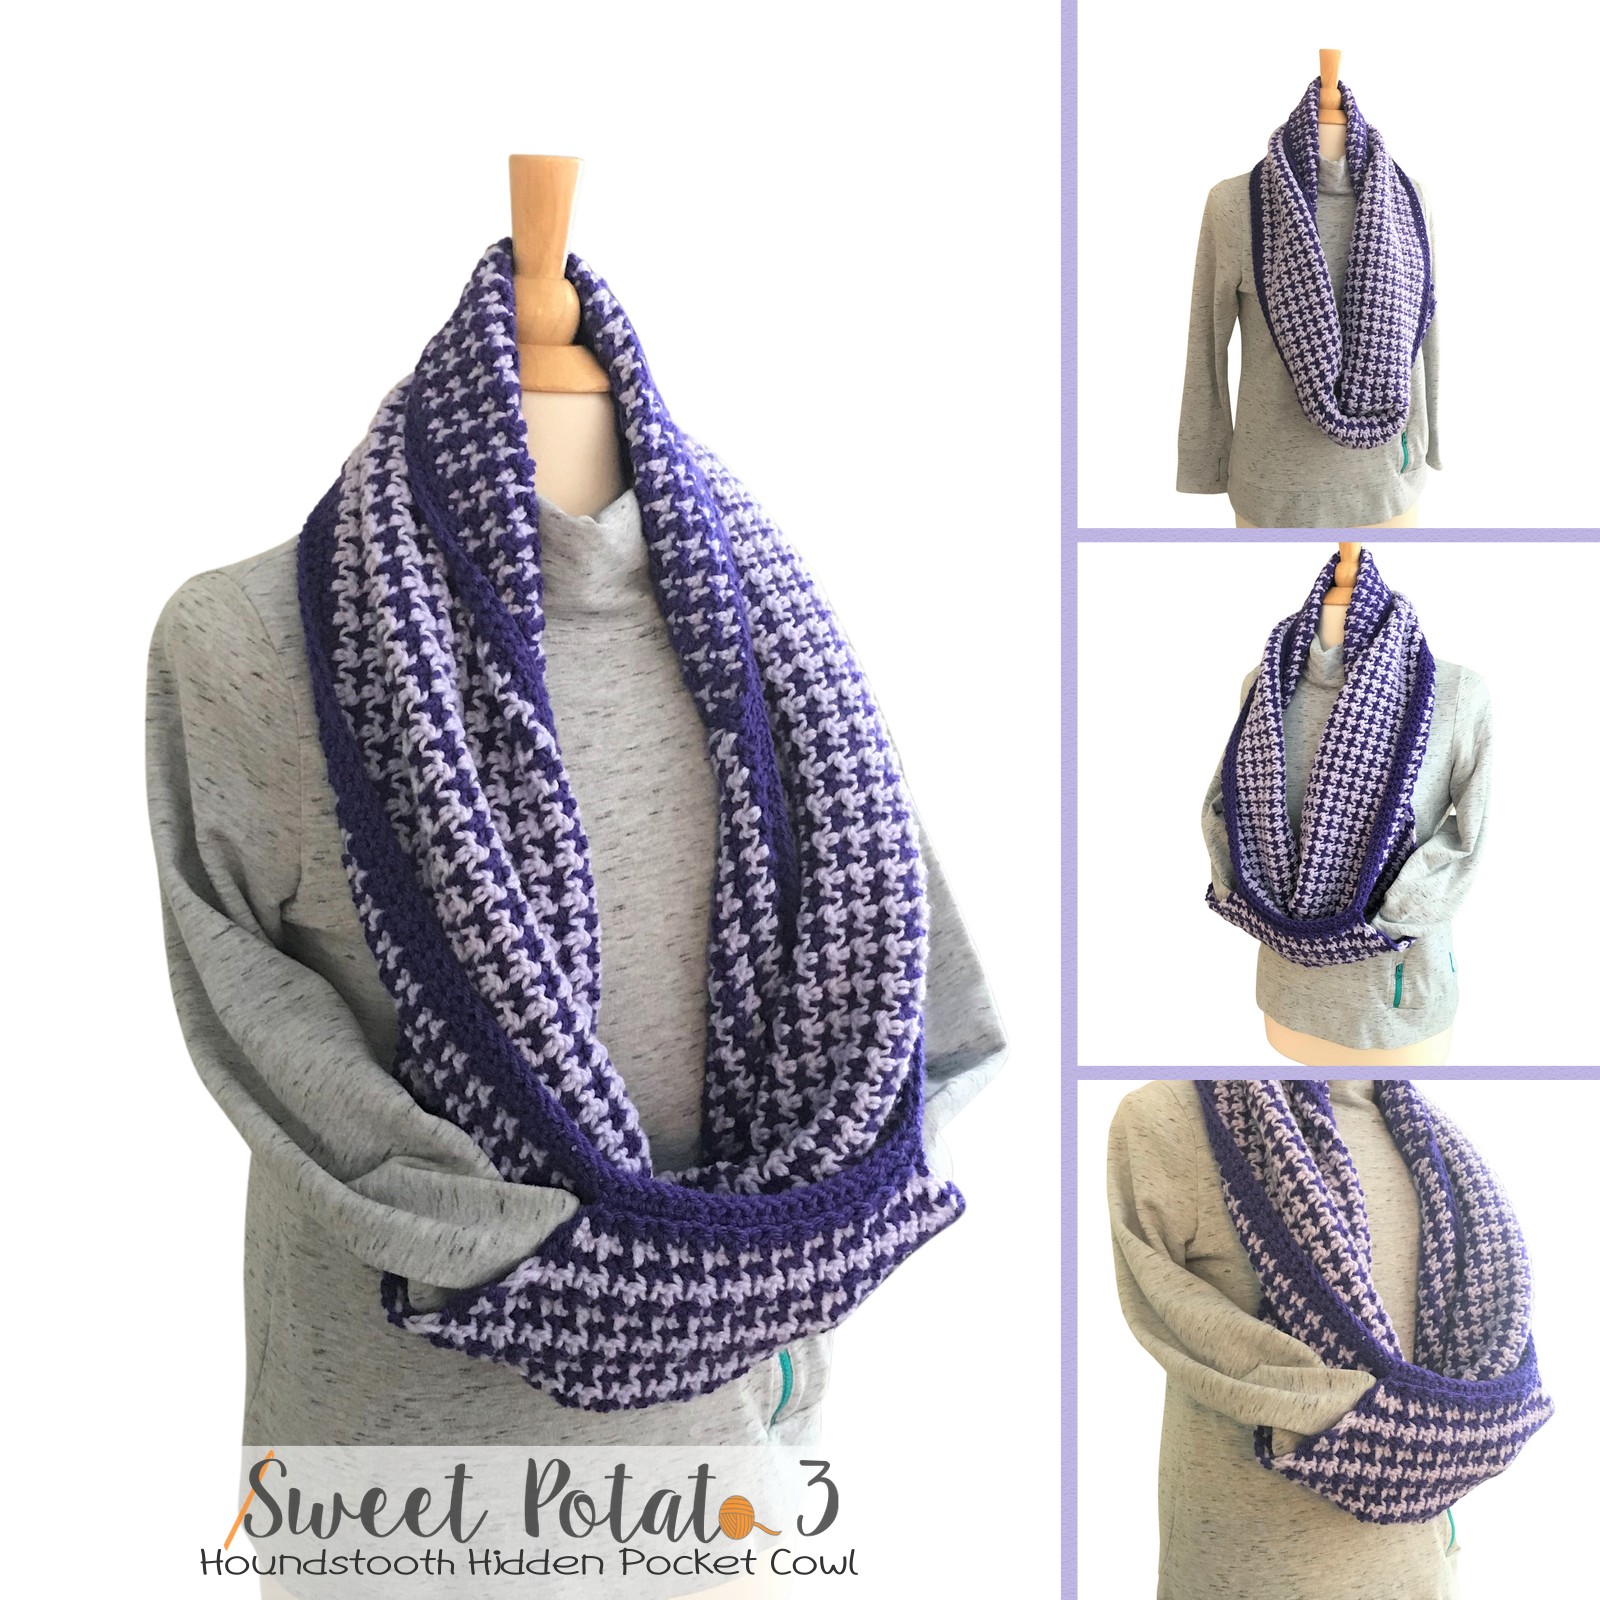 You are currently viewing Houndstooth Pocket Cowl Crochet Pattern